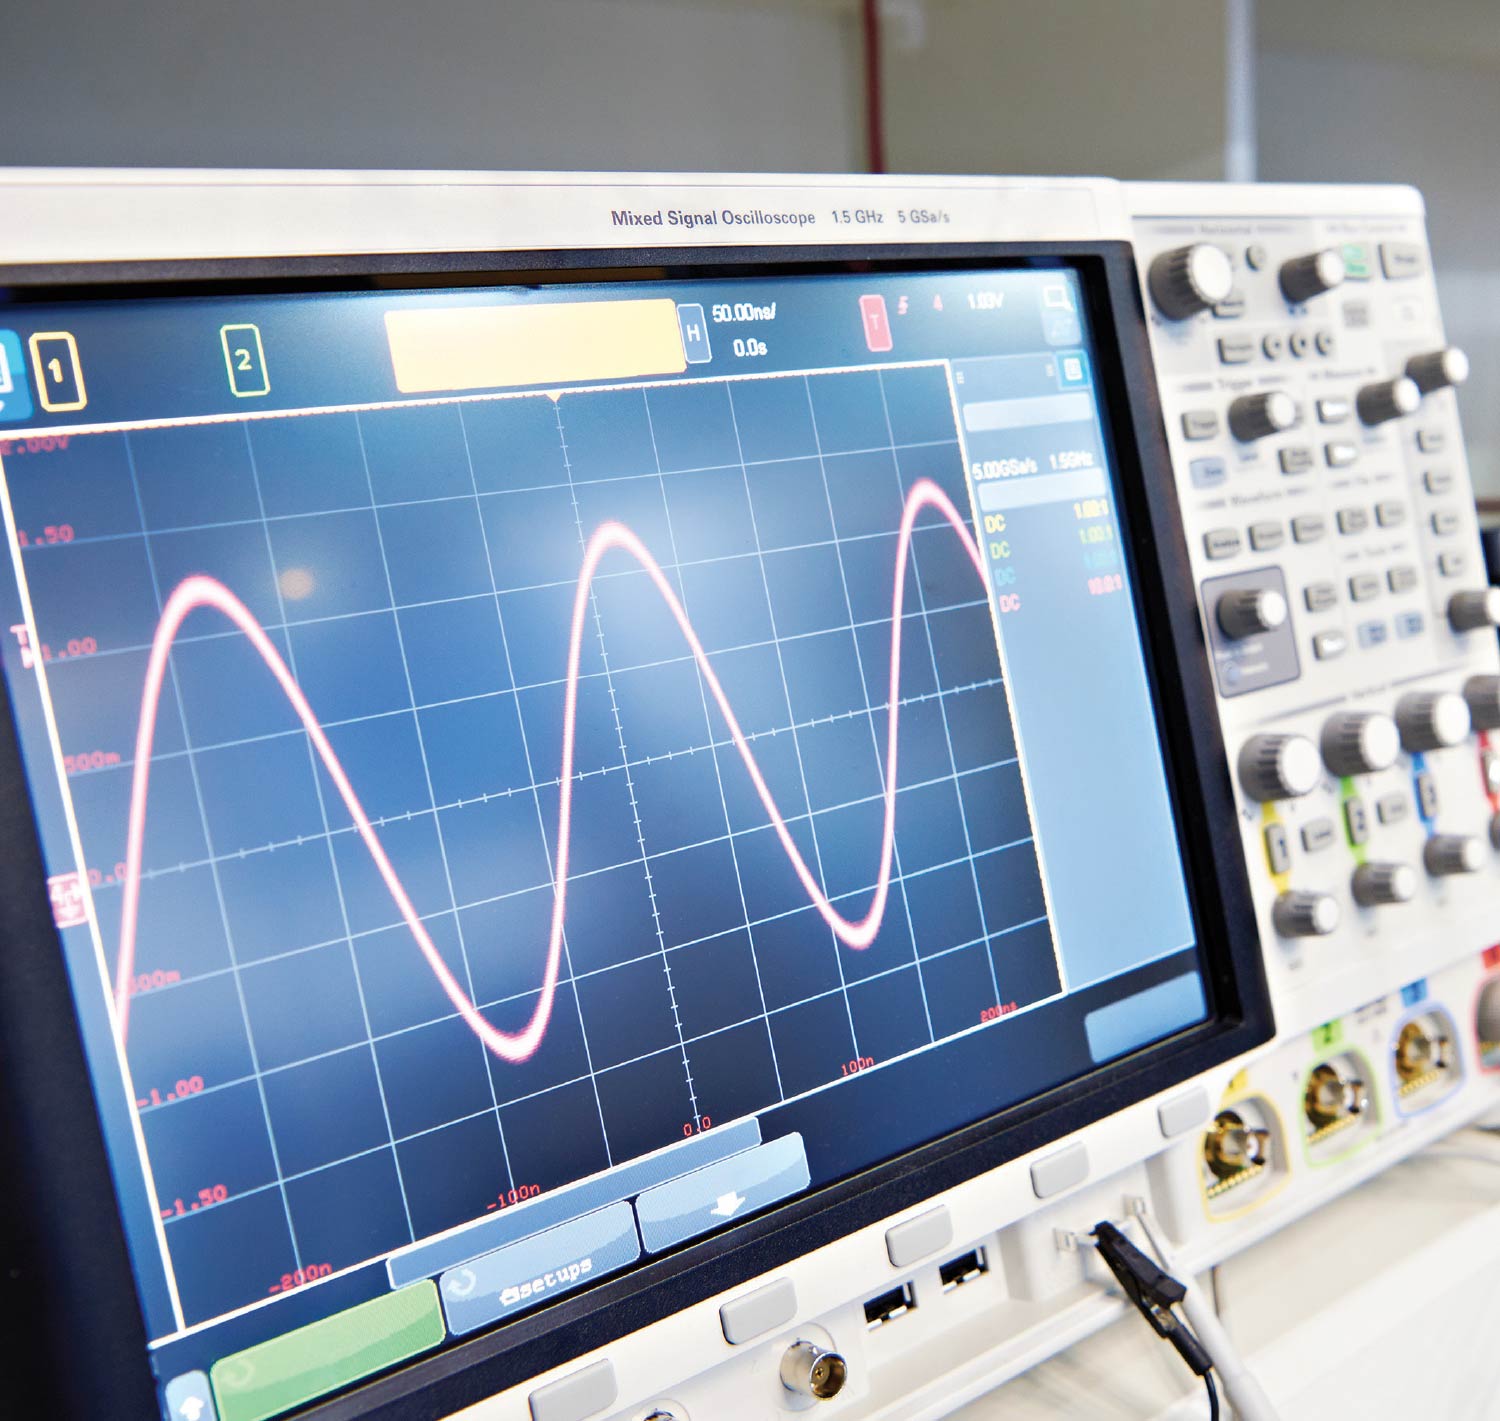 Tailoring Safety into Audio Frequency Power-Line Susceptibility Testing